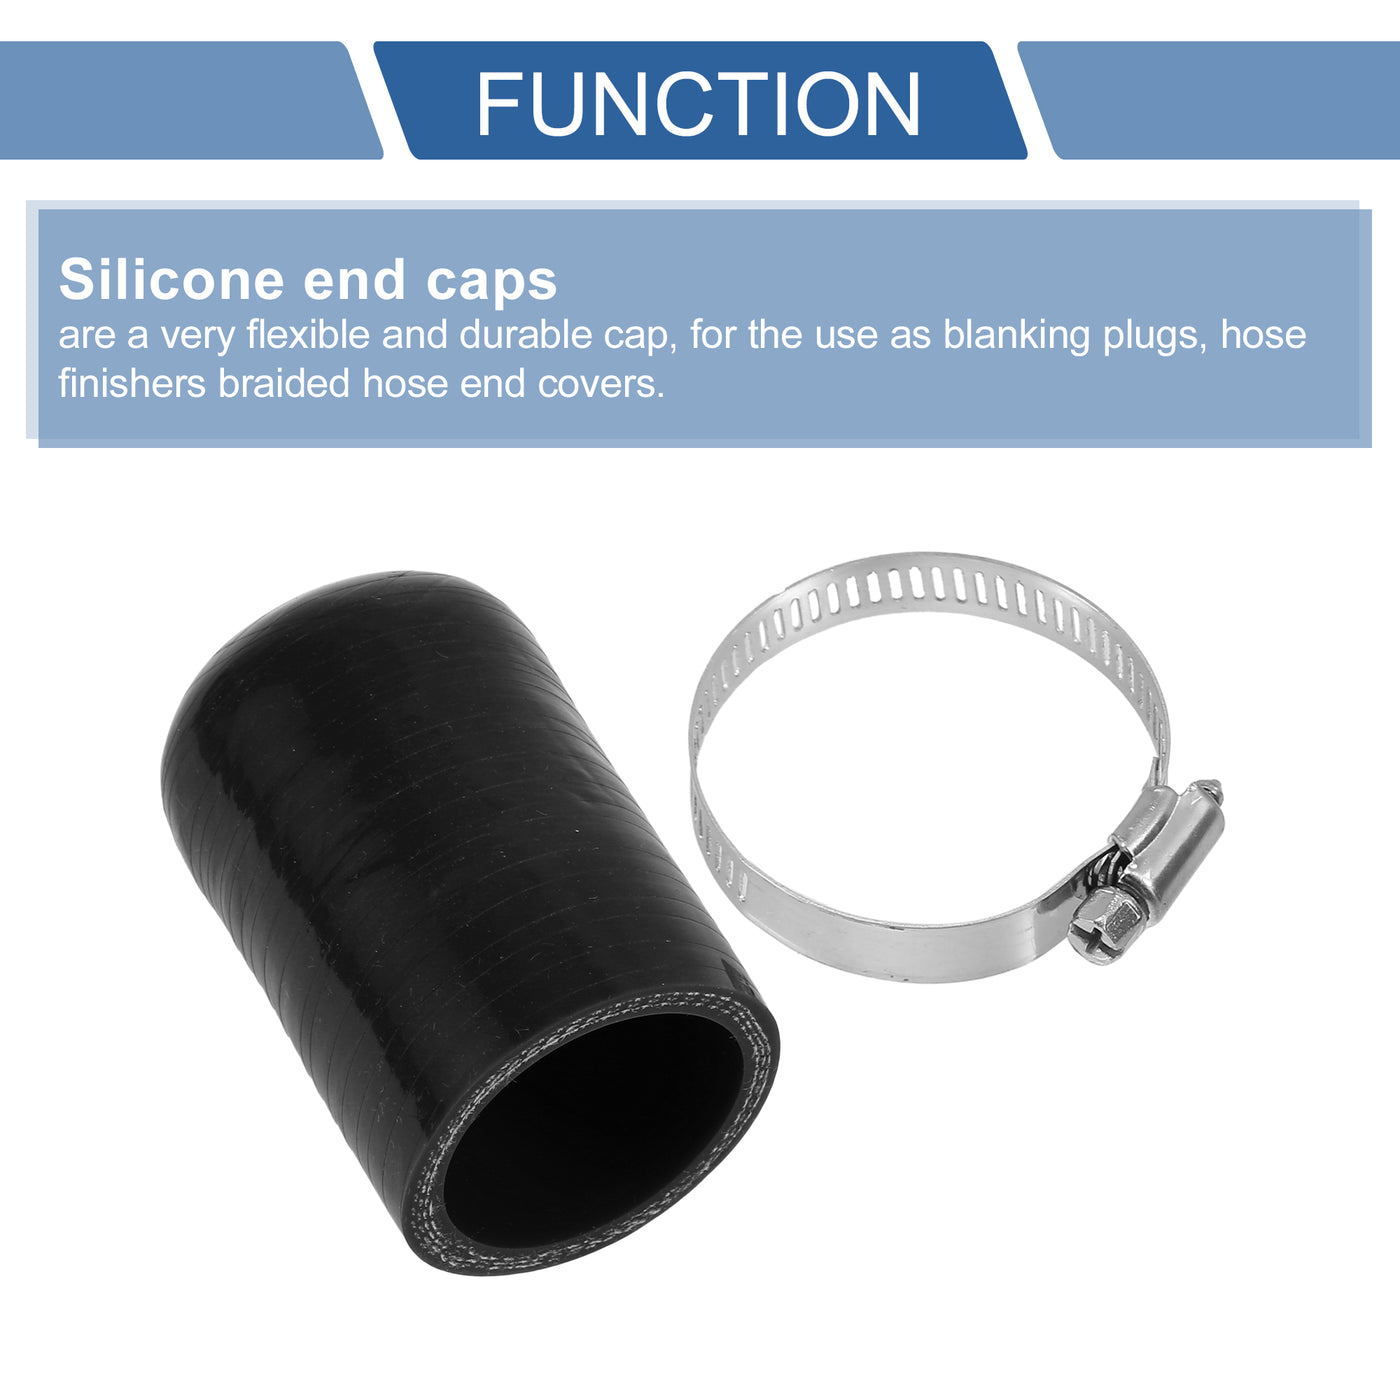 X AUTOHAUX 1 Pcs 60mm Length 38mm/1.50" ID Black Car Silicone Rubber Hose End Cap with Clamp Silicone Reinforced Blanking Cap for Bypass Tube Universal